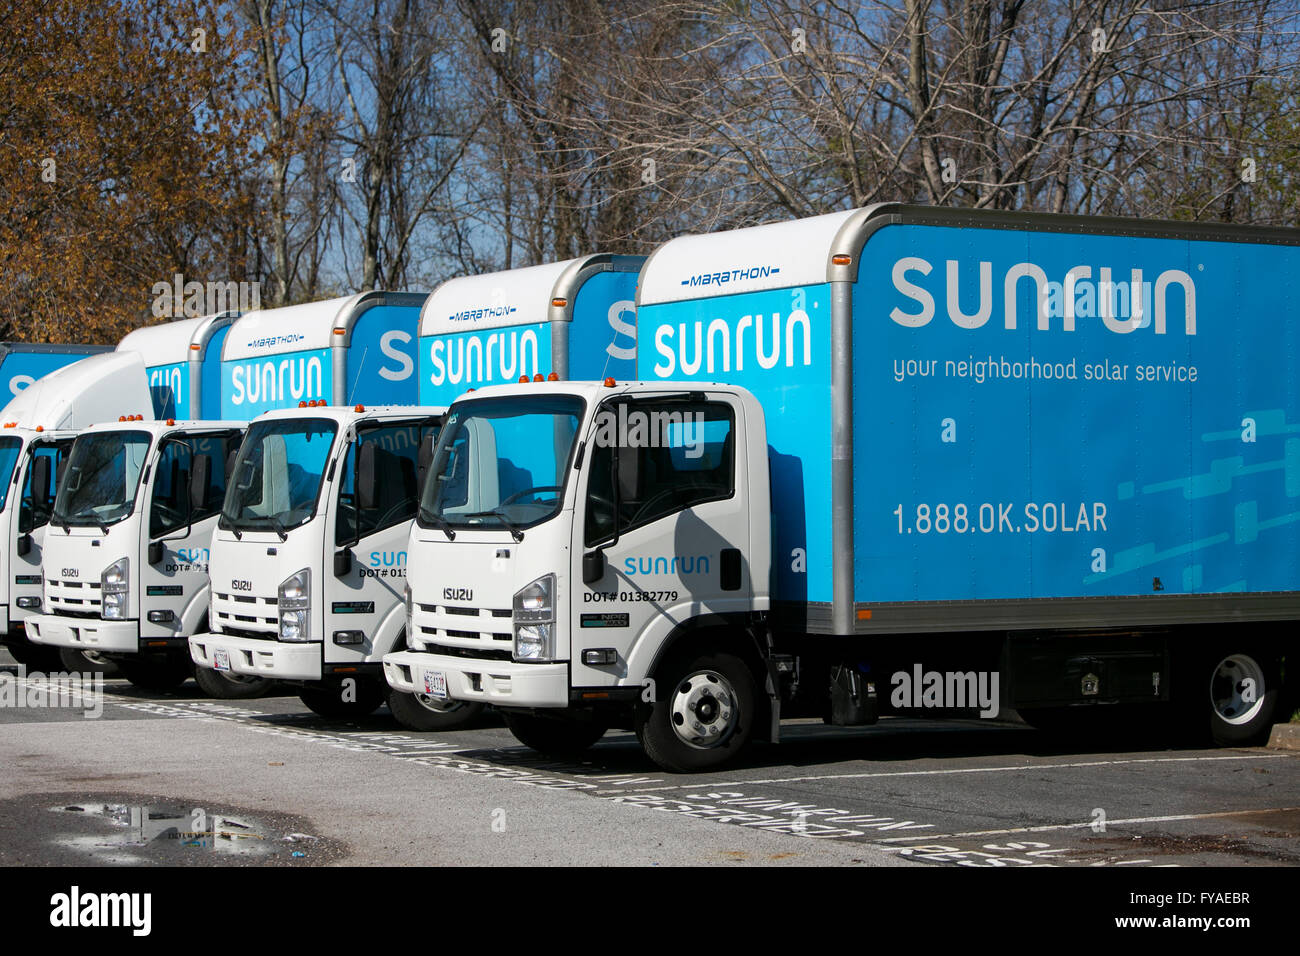 Work vans featuring logos of the solar provider Sunrun Inc., in Linthicum  Heights, Maryland on April 10, 2016 Stock Photo - Alamy